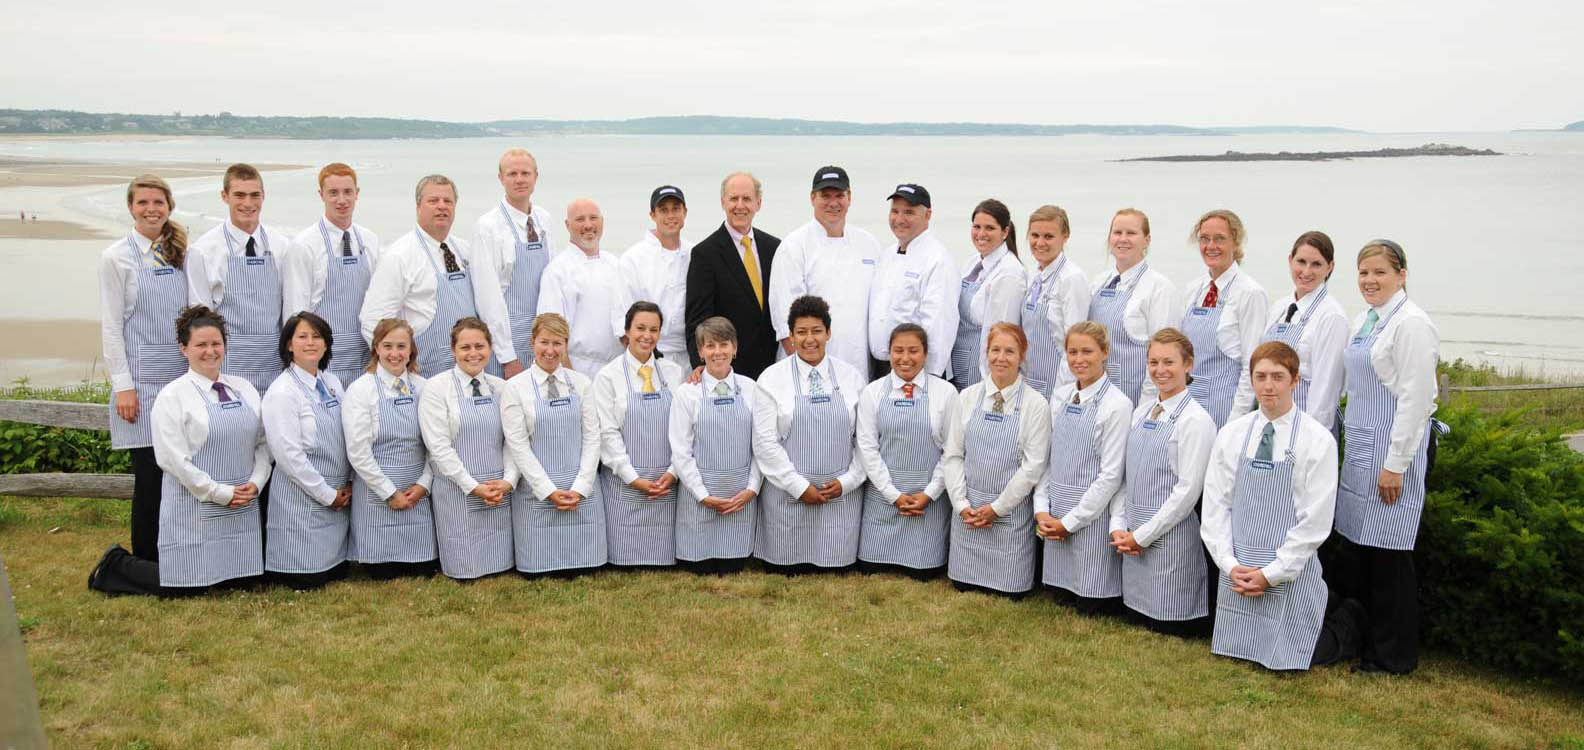 Our team of professional planners, chefs, bartenders, and servers, at beachfront wedding in Cape Elizabeth, Maine.